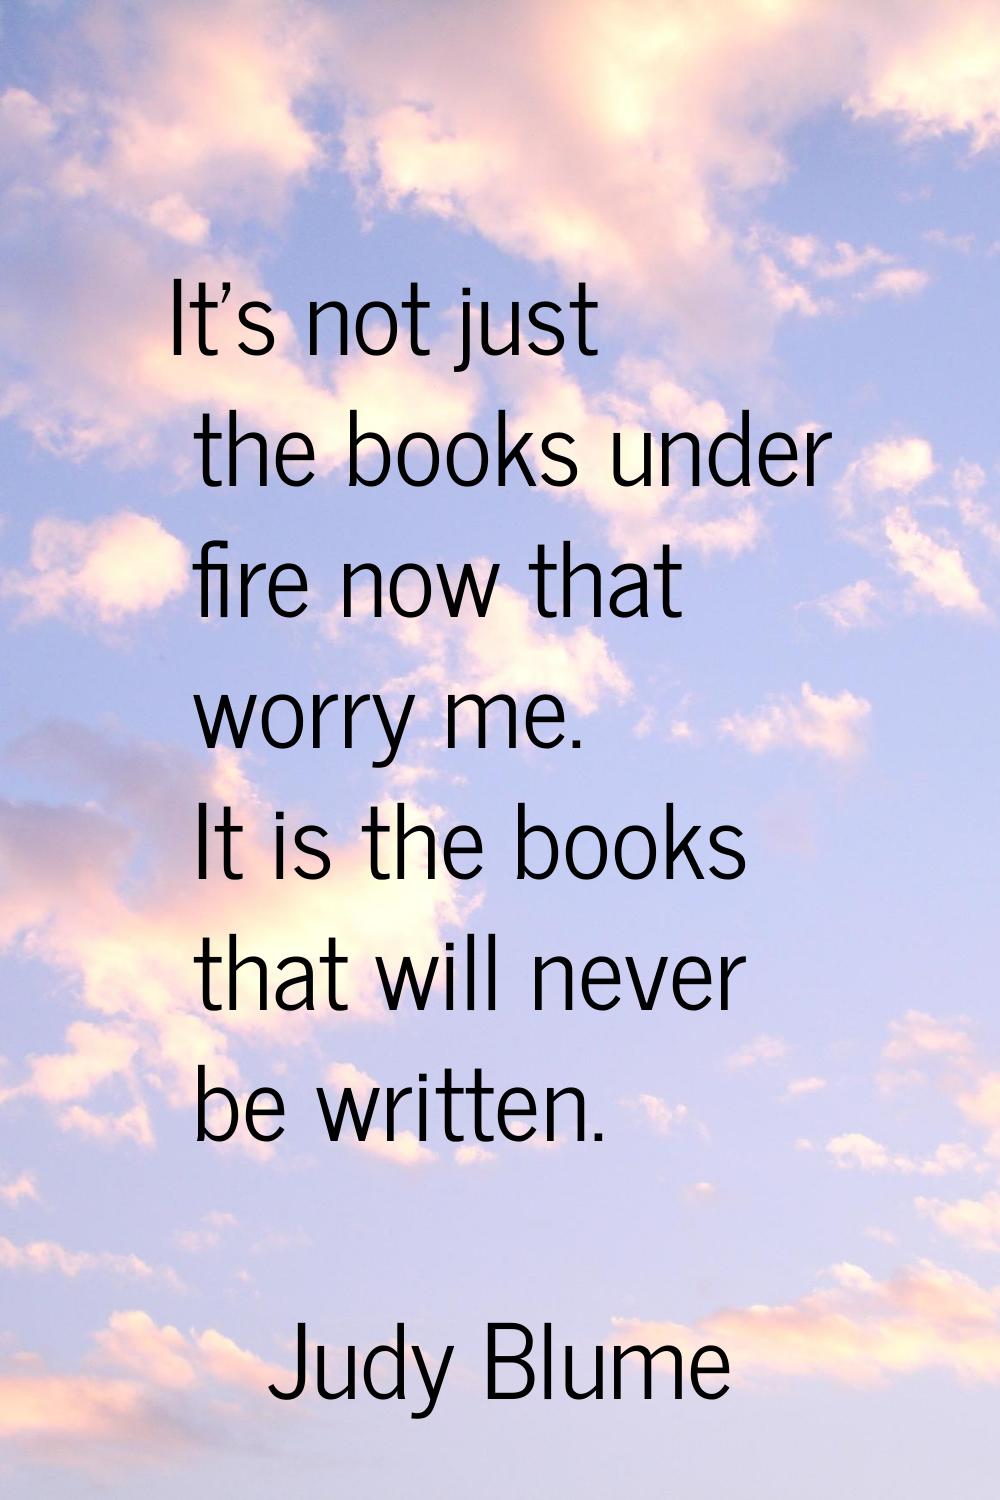 It's not just the books under fire now that worry me. It is the books that will never be written.